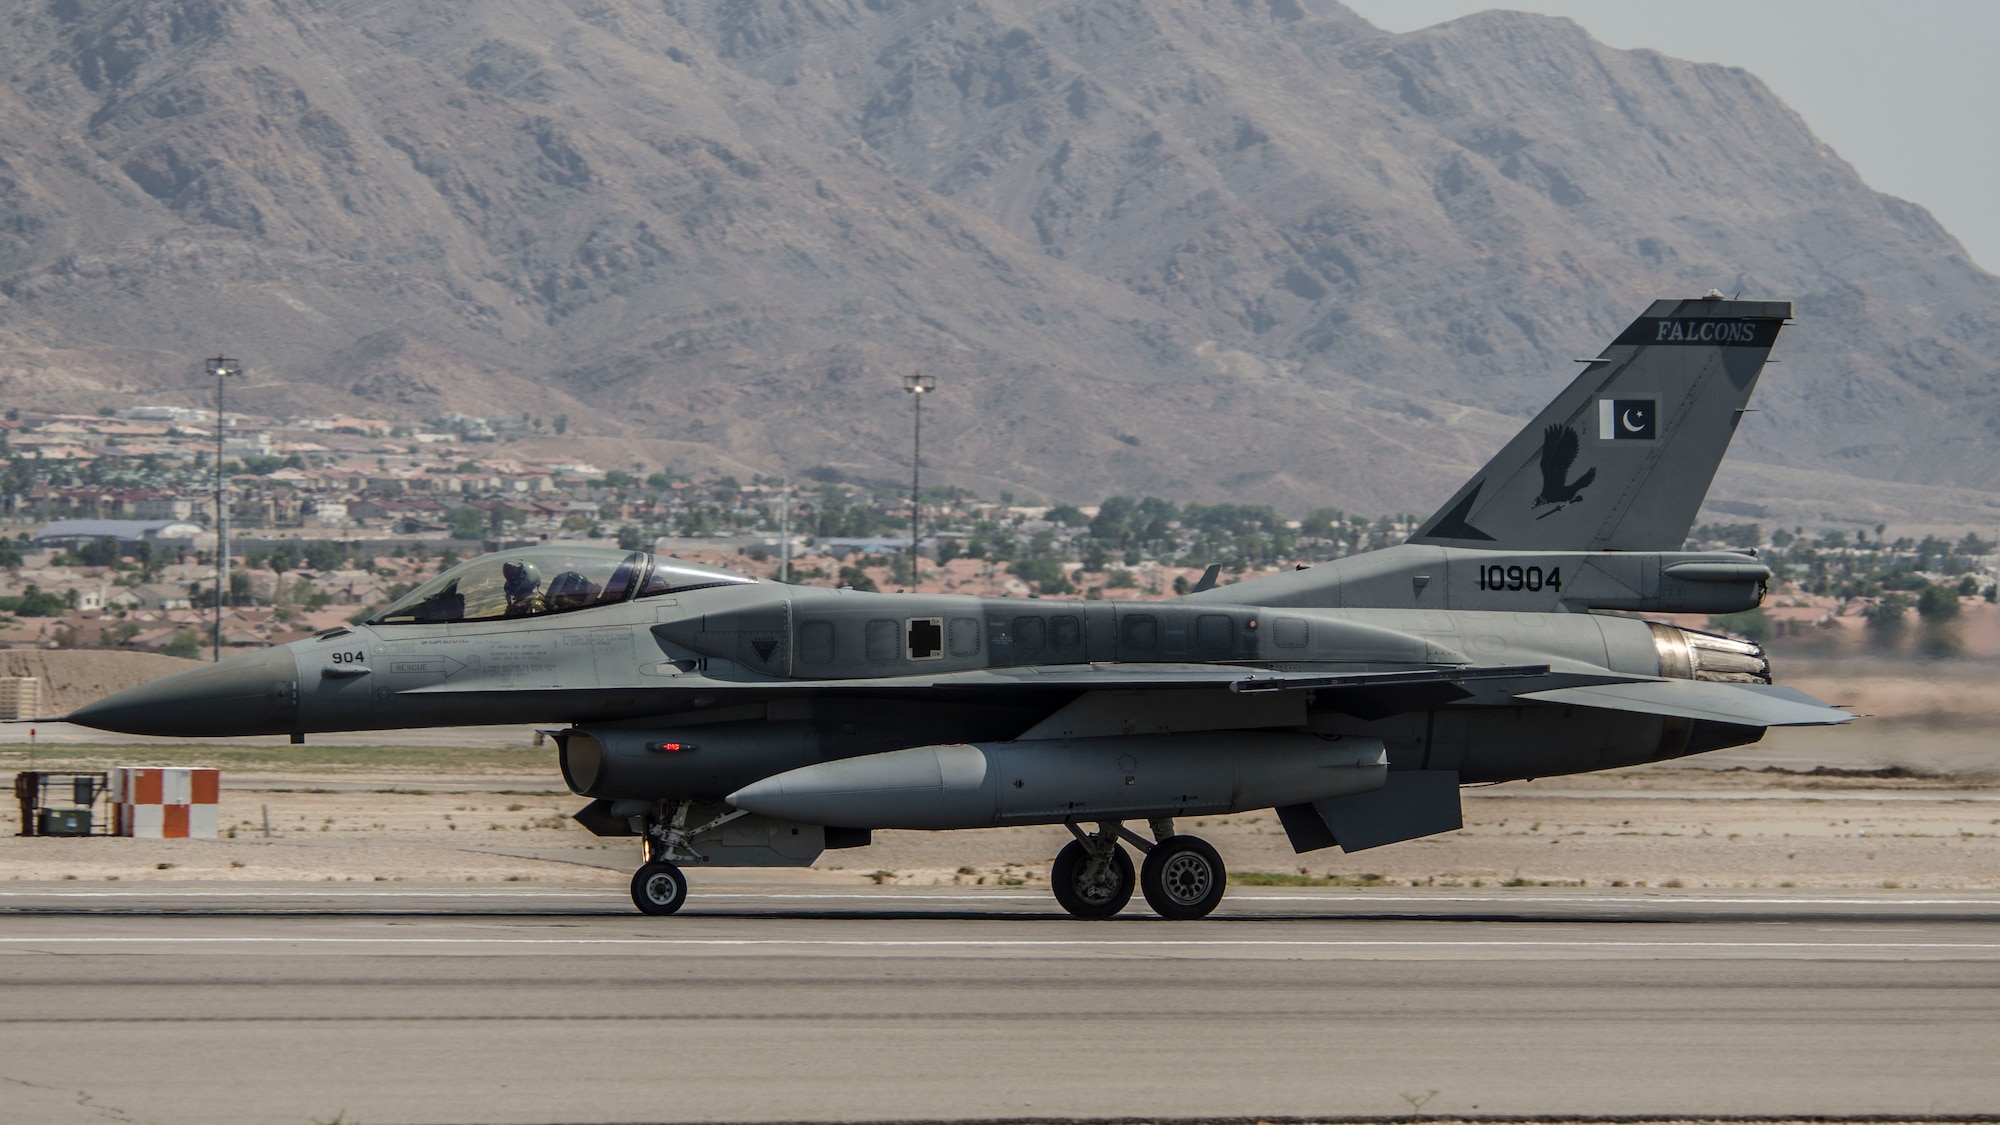 A Pakistan air force F-16C Fighting Falcon assigned to the No.5 Squadron, Rafiqui Air Force Base prepares for take-off at Nellis Air Force Base, Nev., Aug. 17, 2016. The No. 5 Squadron travelled more than 7,700 miles to participate in Red Flag 16-4. (U.S. Air Force photo by Tech Sgt. Frank Miller/Released)